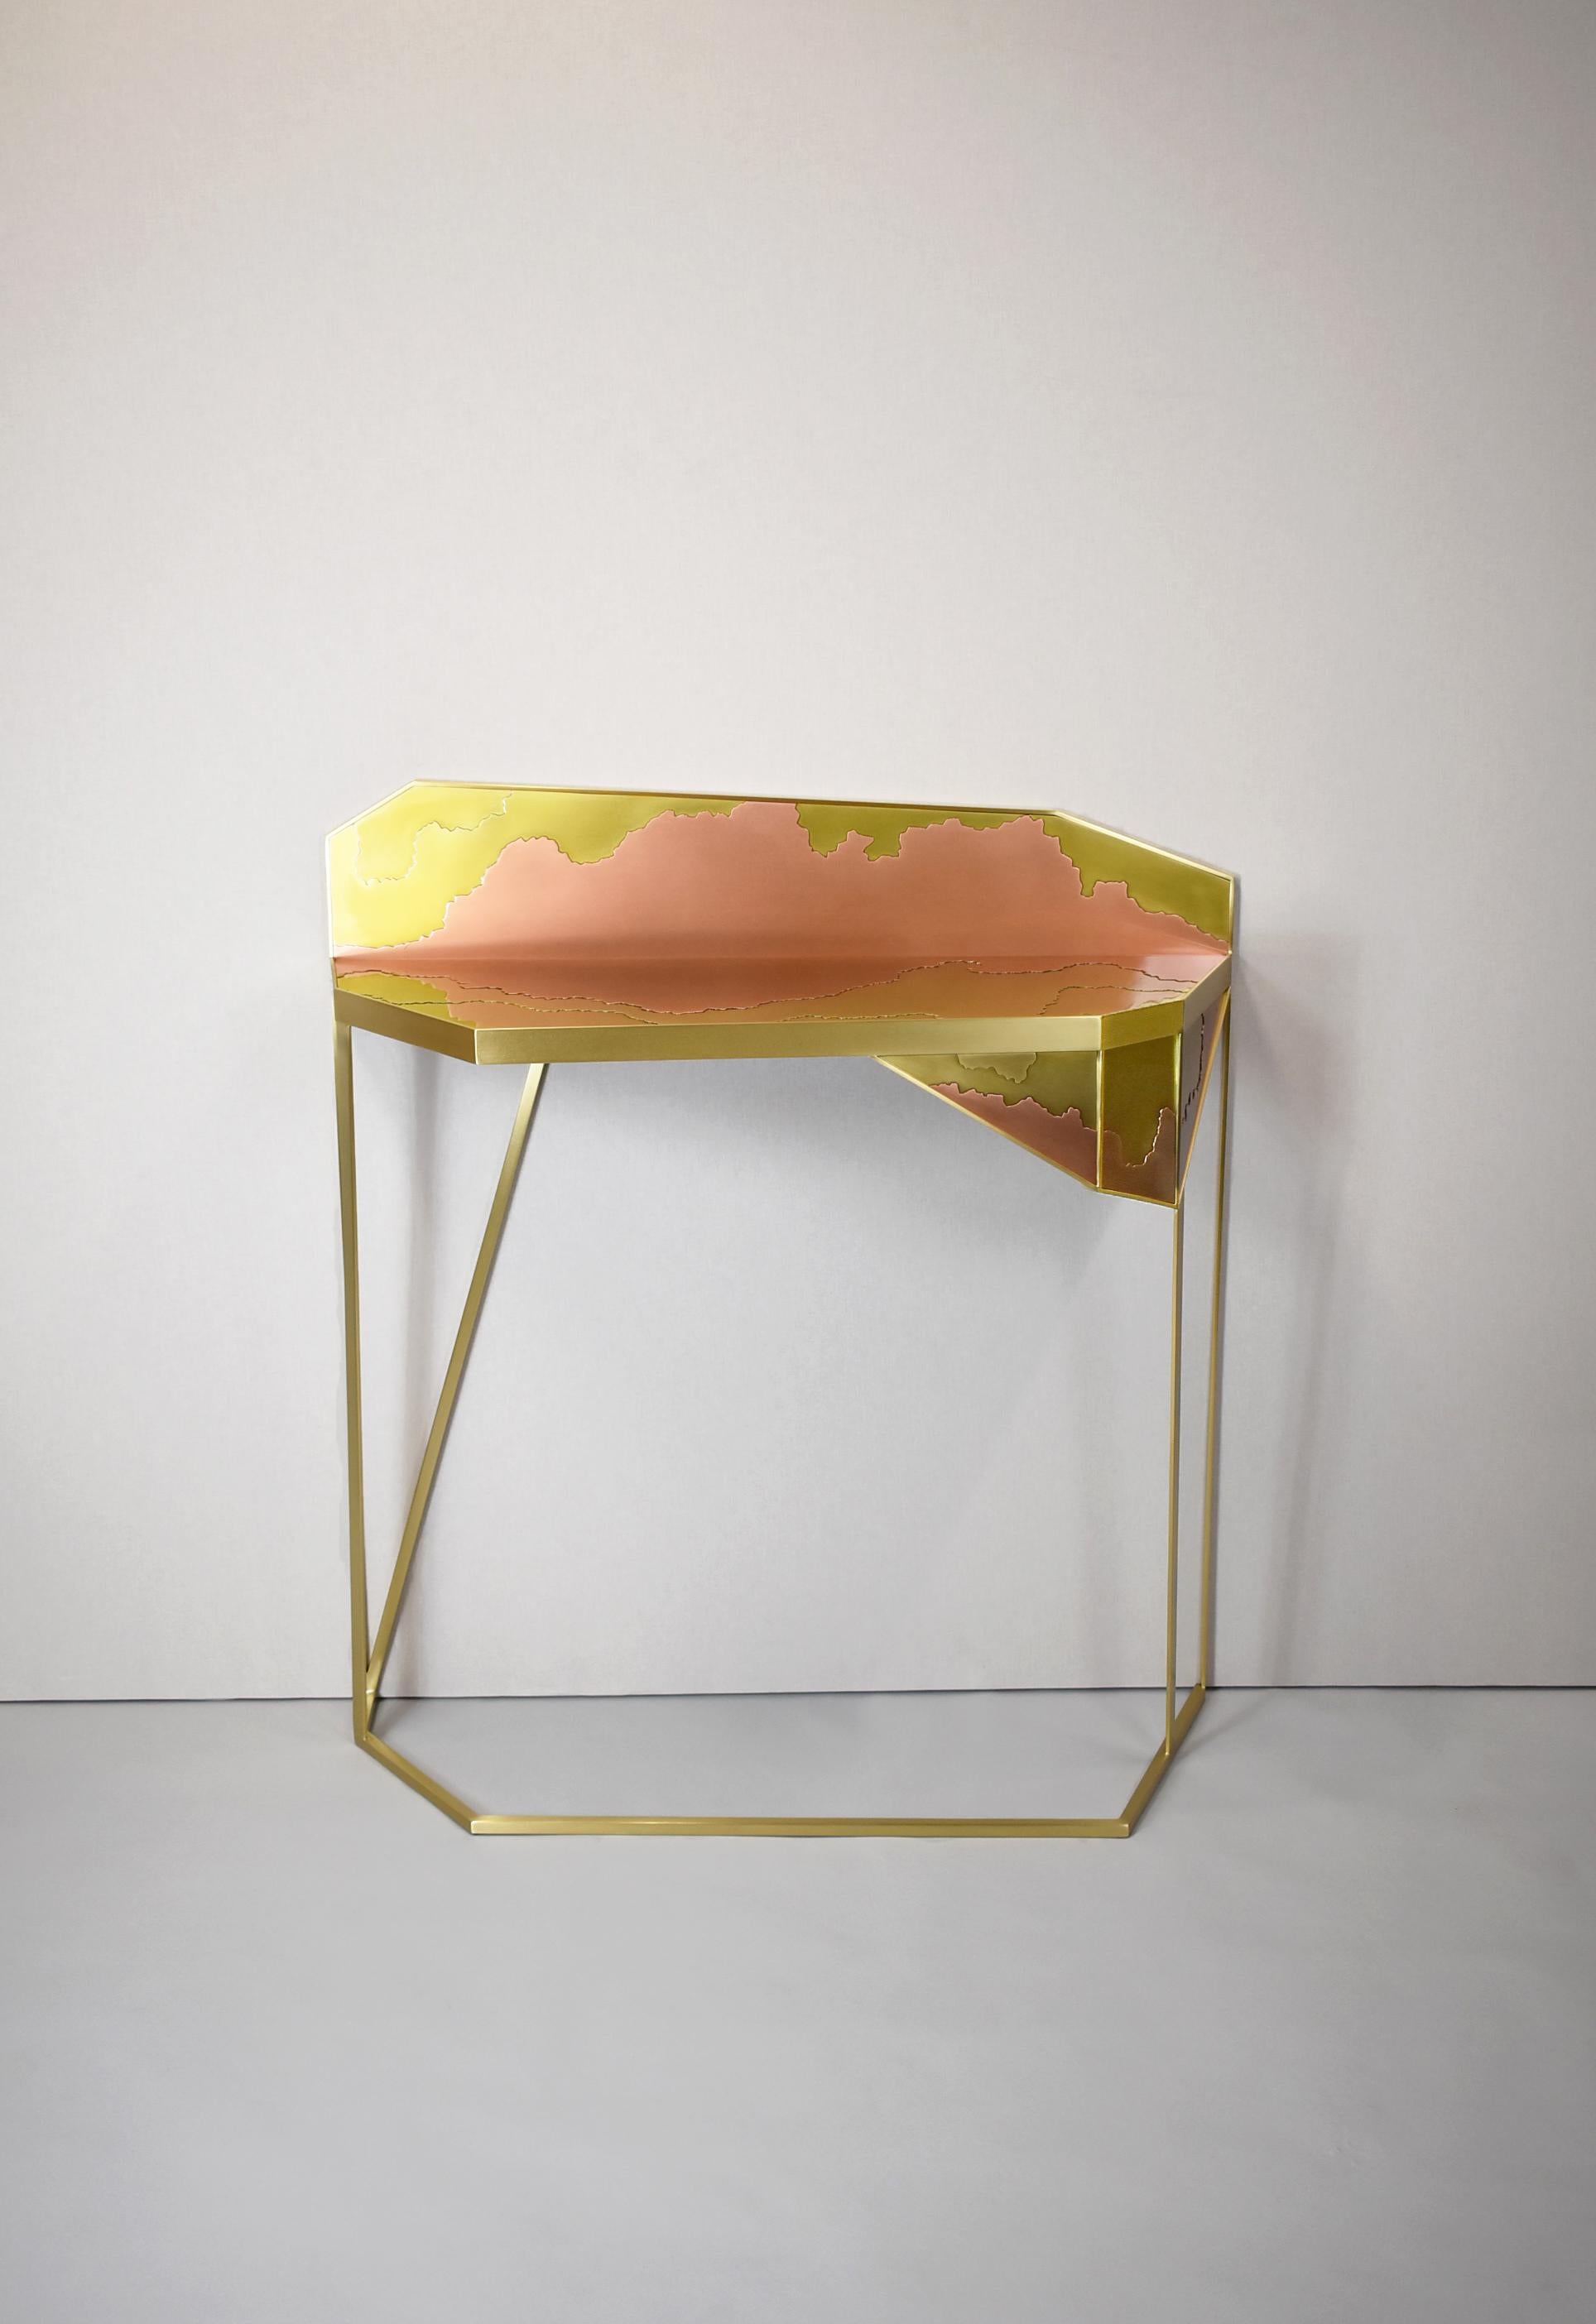 Erosion console table by Atelier Demichelis
Numbered and Signed
Dimensions: W 98 x D 38 x H 107 cm
Materials: Patinated Brass, Copper

Laura Demichelis

Laura was born & brought up in Provence, in the south of France.
Trained at the École